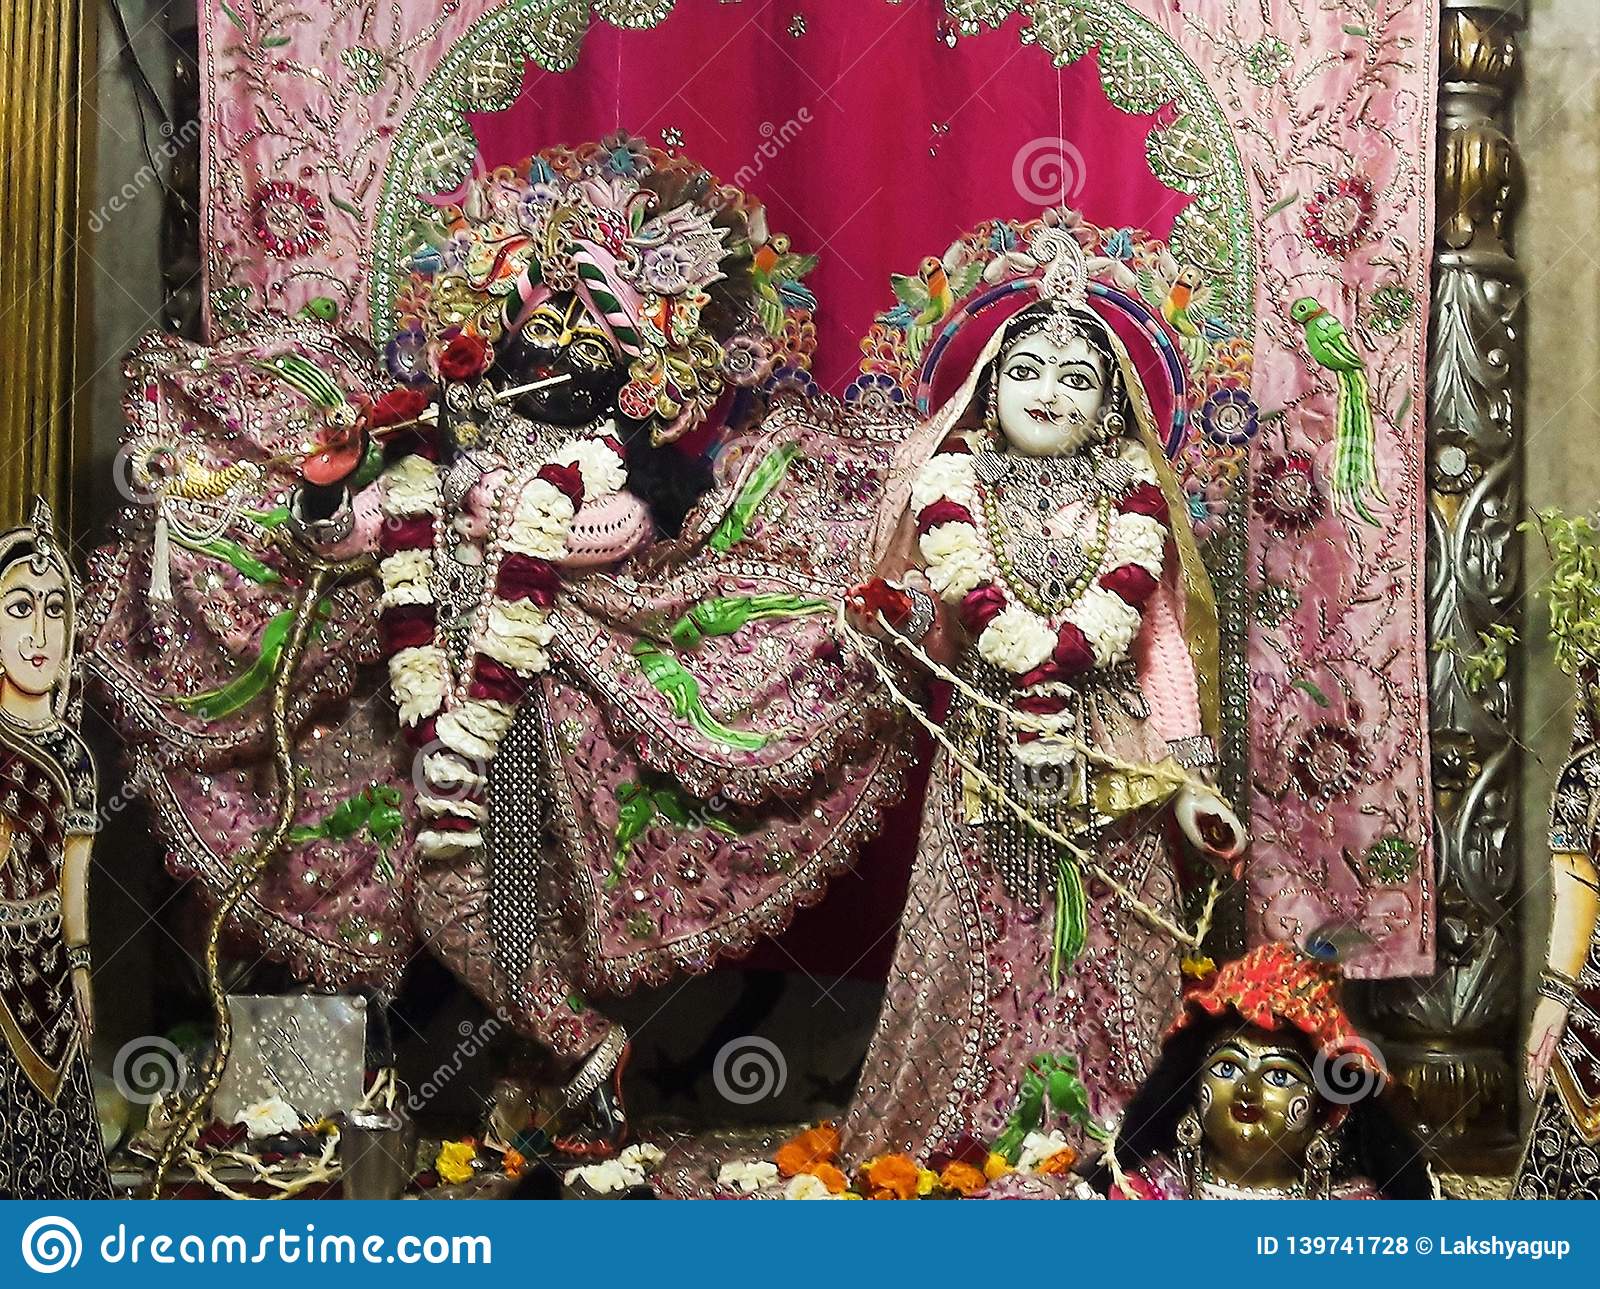 most beautiful images of lord krishna and radha